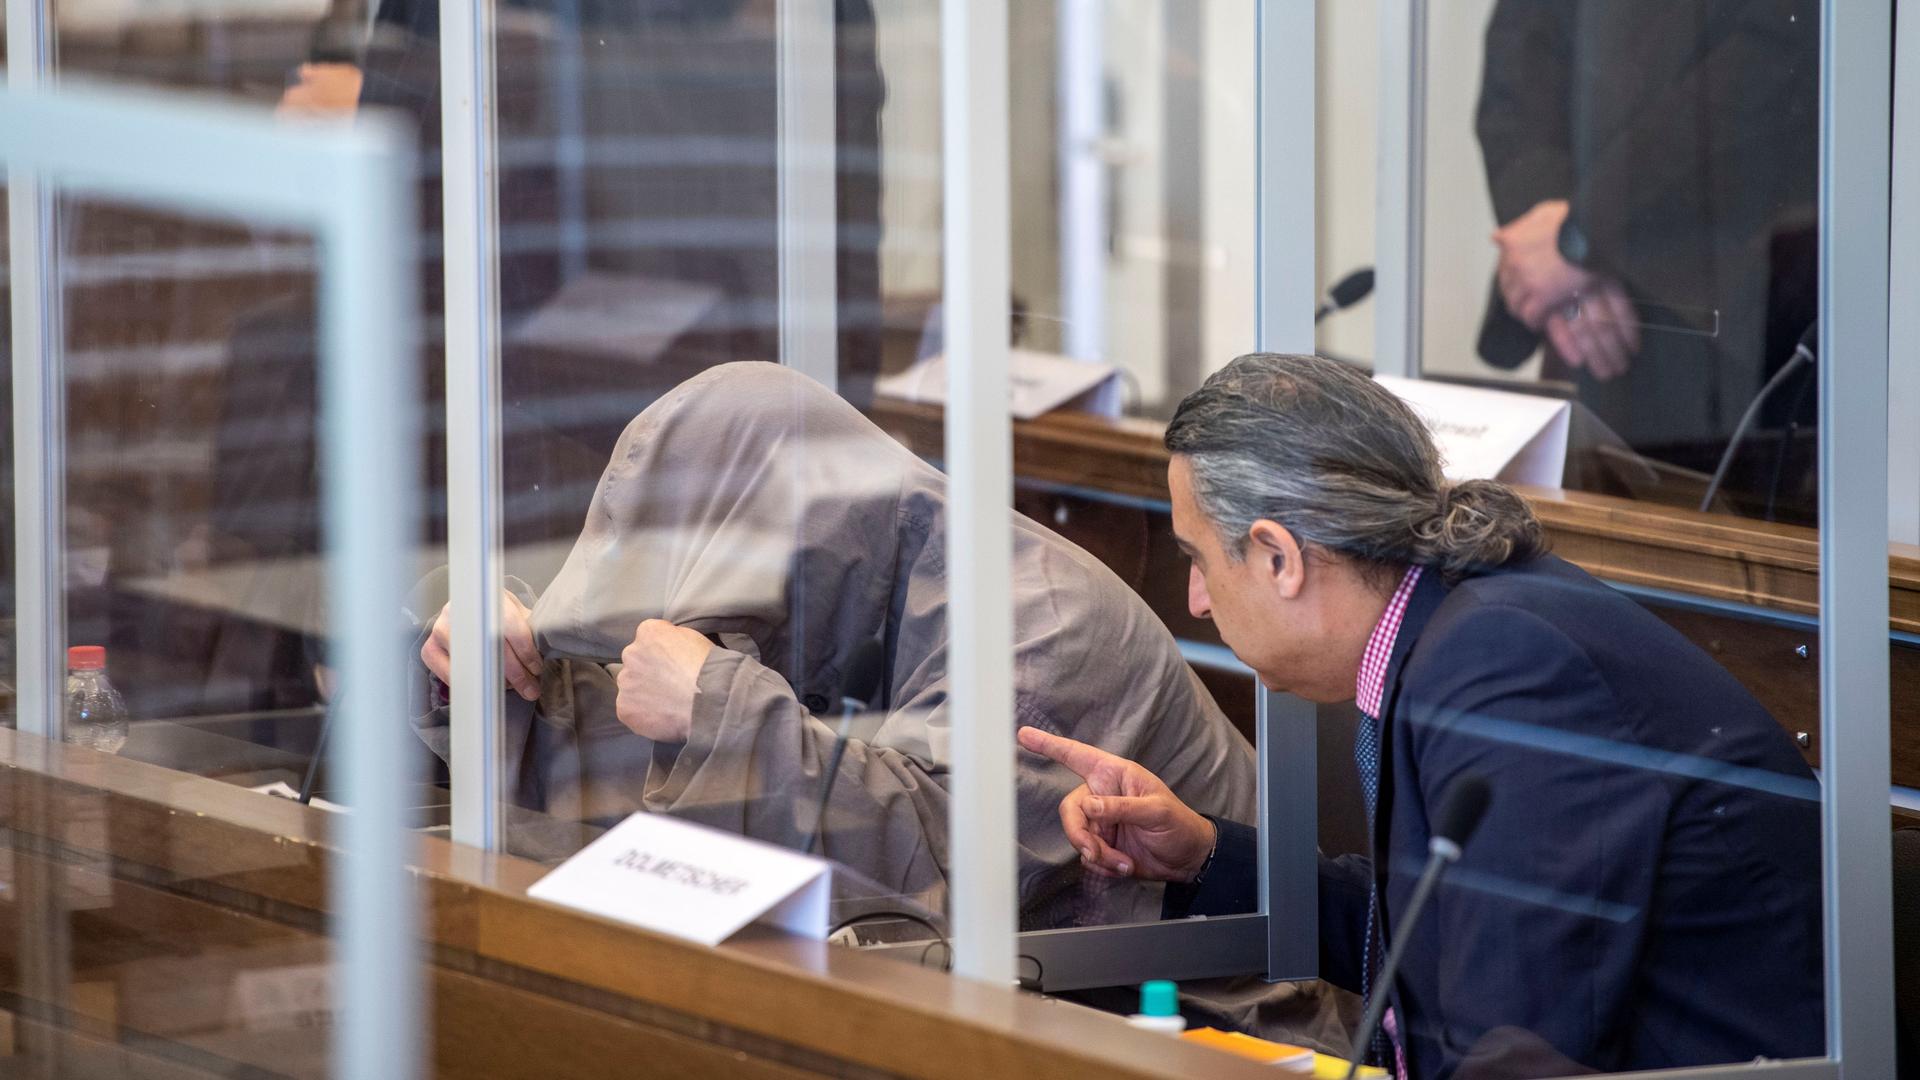 Syrian defendant Eyad A. hides himself under his hood prior to the first trial of suspected members of Syrian President Bashar al-Assad's security services for crimes against humanity, in Koblenz, Germany, April 23, 2020.